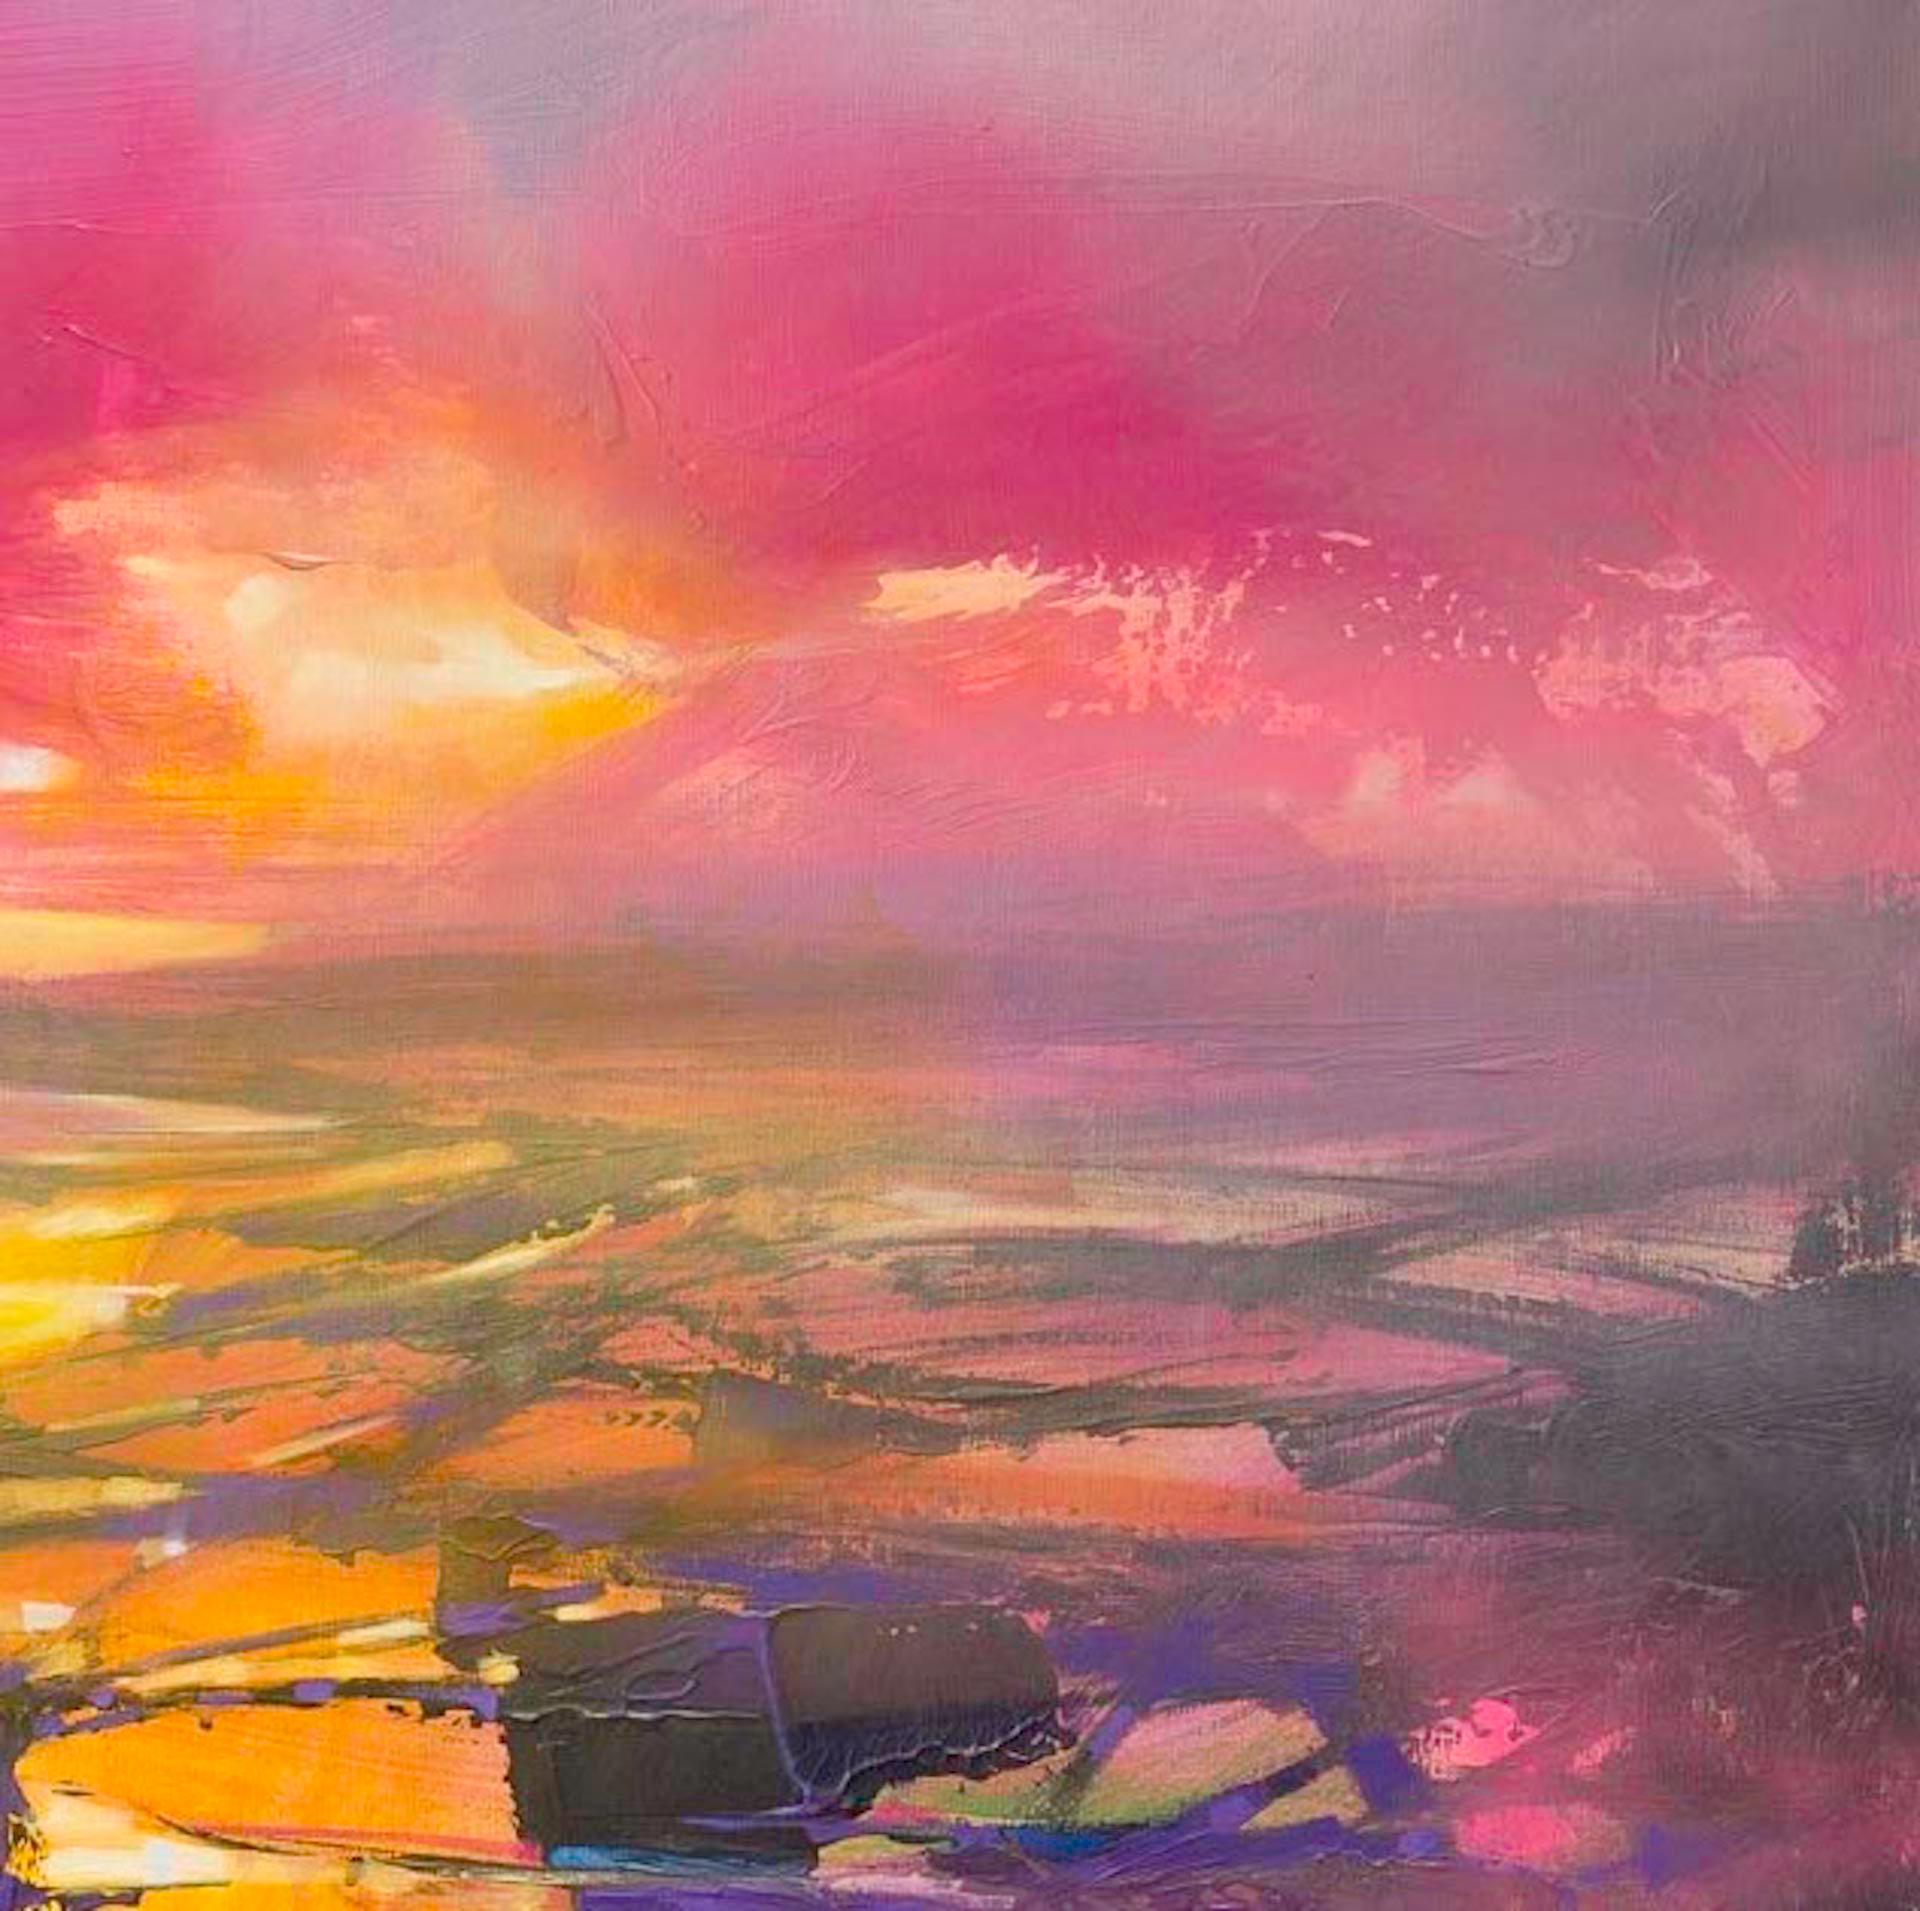 Fragments from Above, original painting colourful contemporary abstract style - Contemporary Painting by Scott Naismith